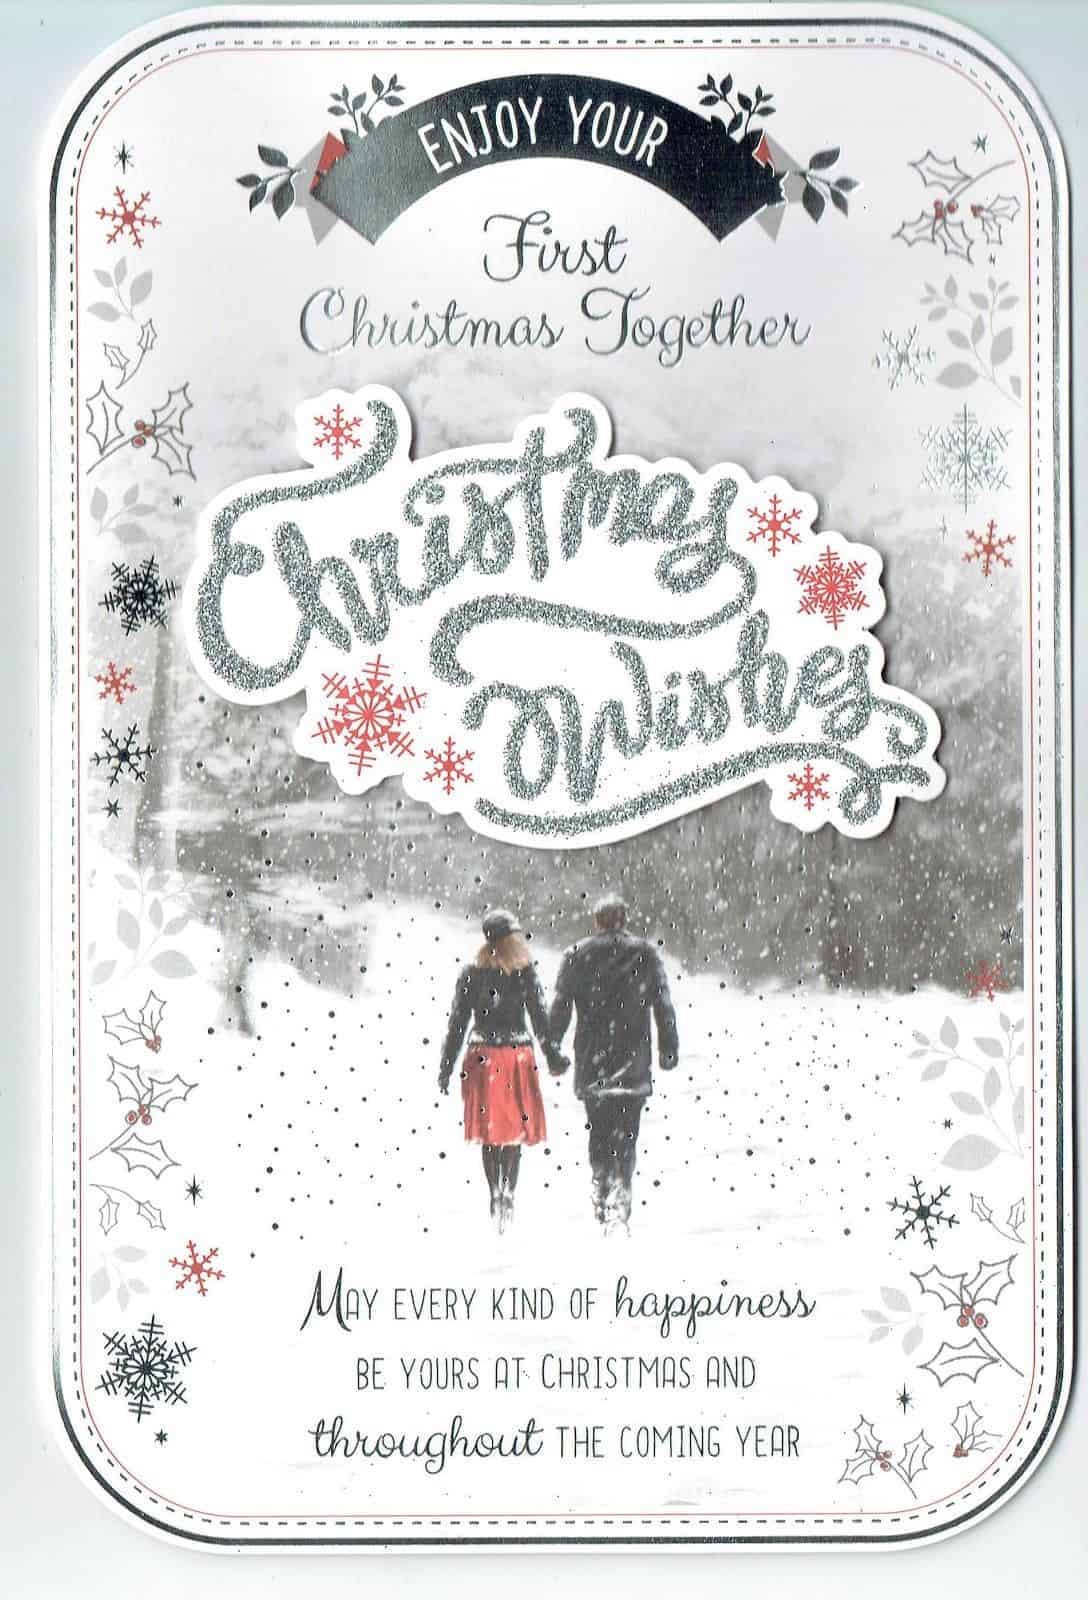 First Christmas Together Christmas Card With Festive Scene With Love Gifts Cards